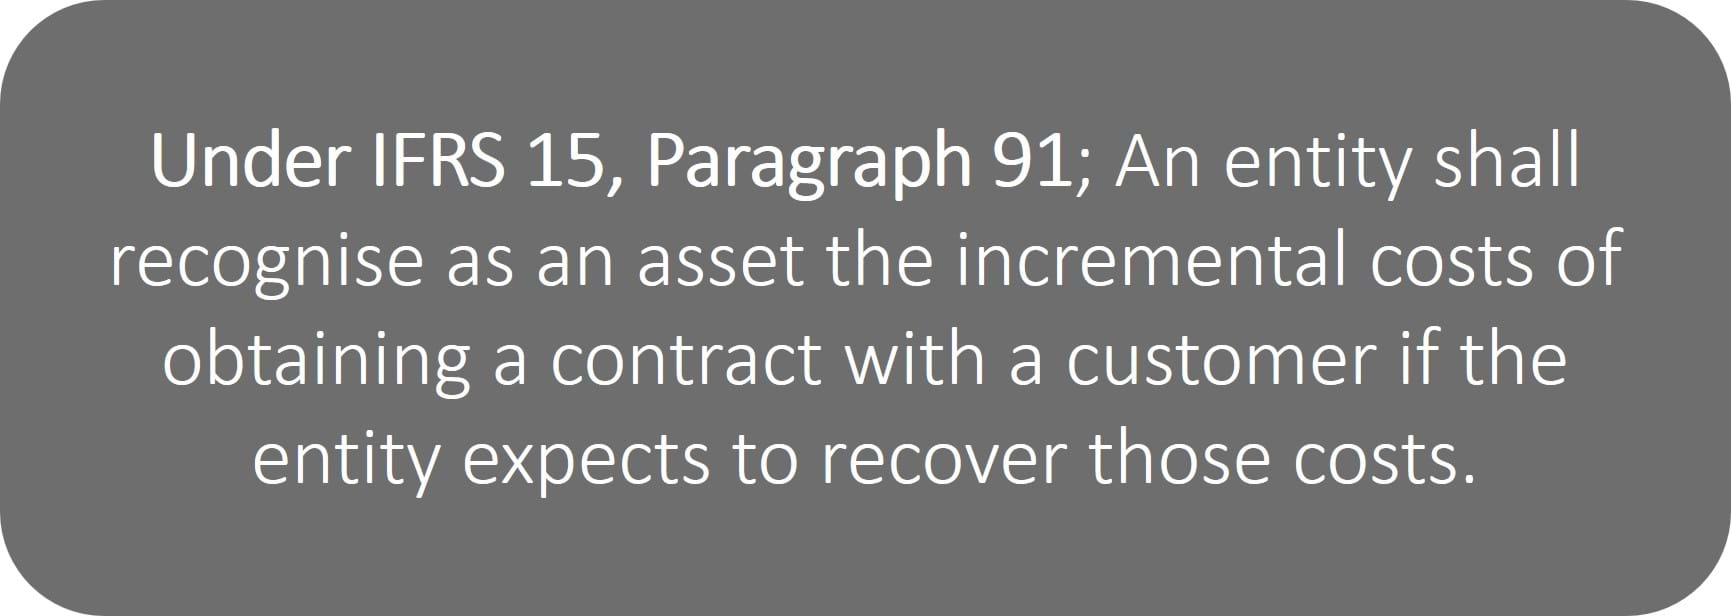 ifrs-15-paragraph-91.jpg